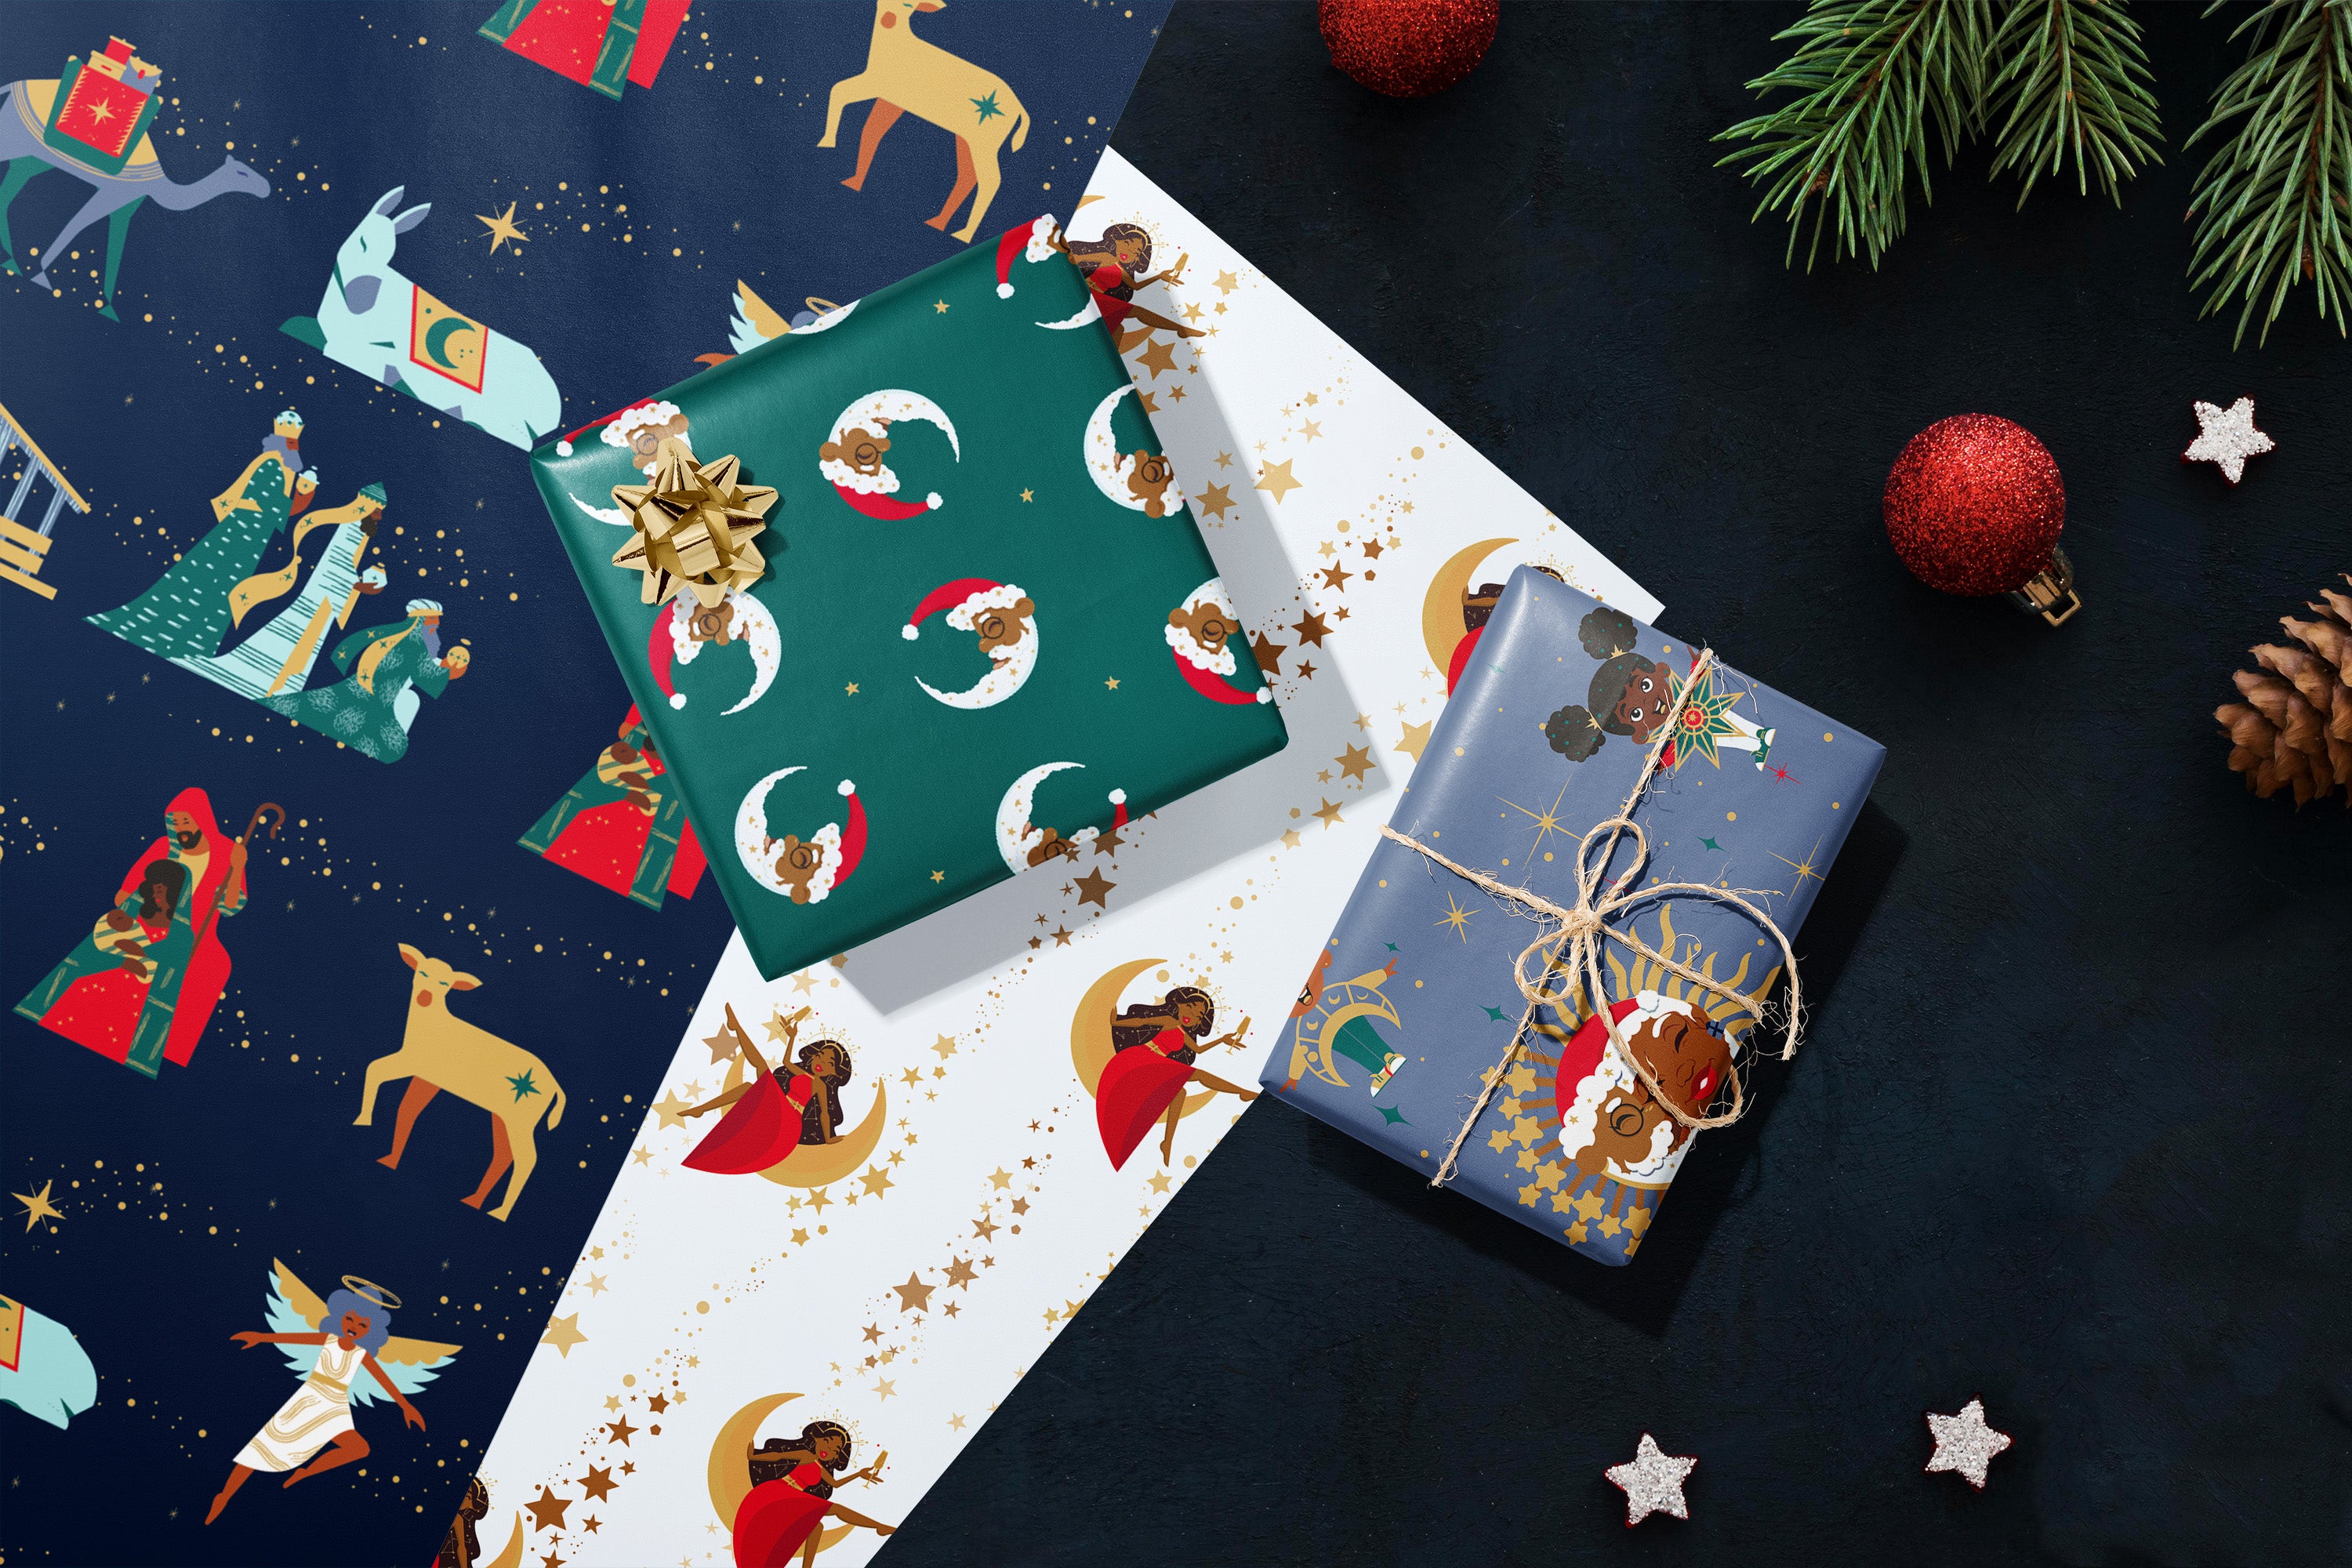 8 Sheet Celestial Holiday Gift Tags & Stickers